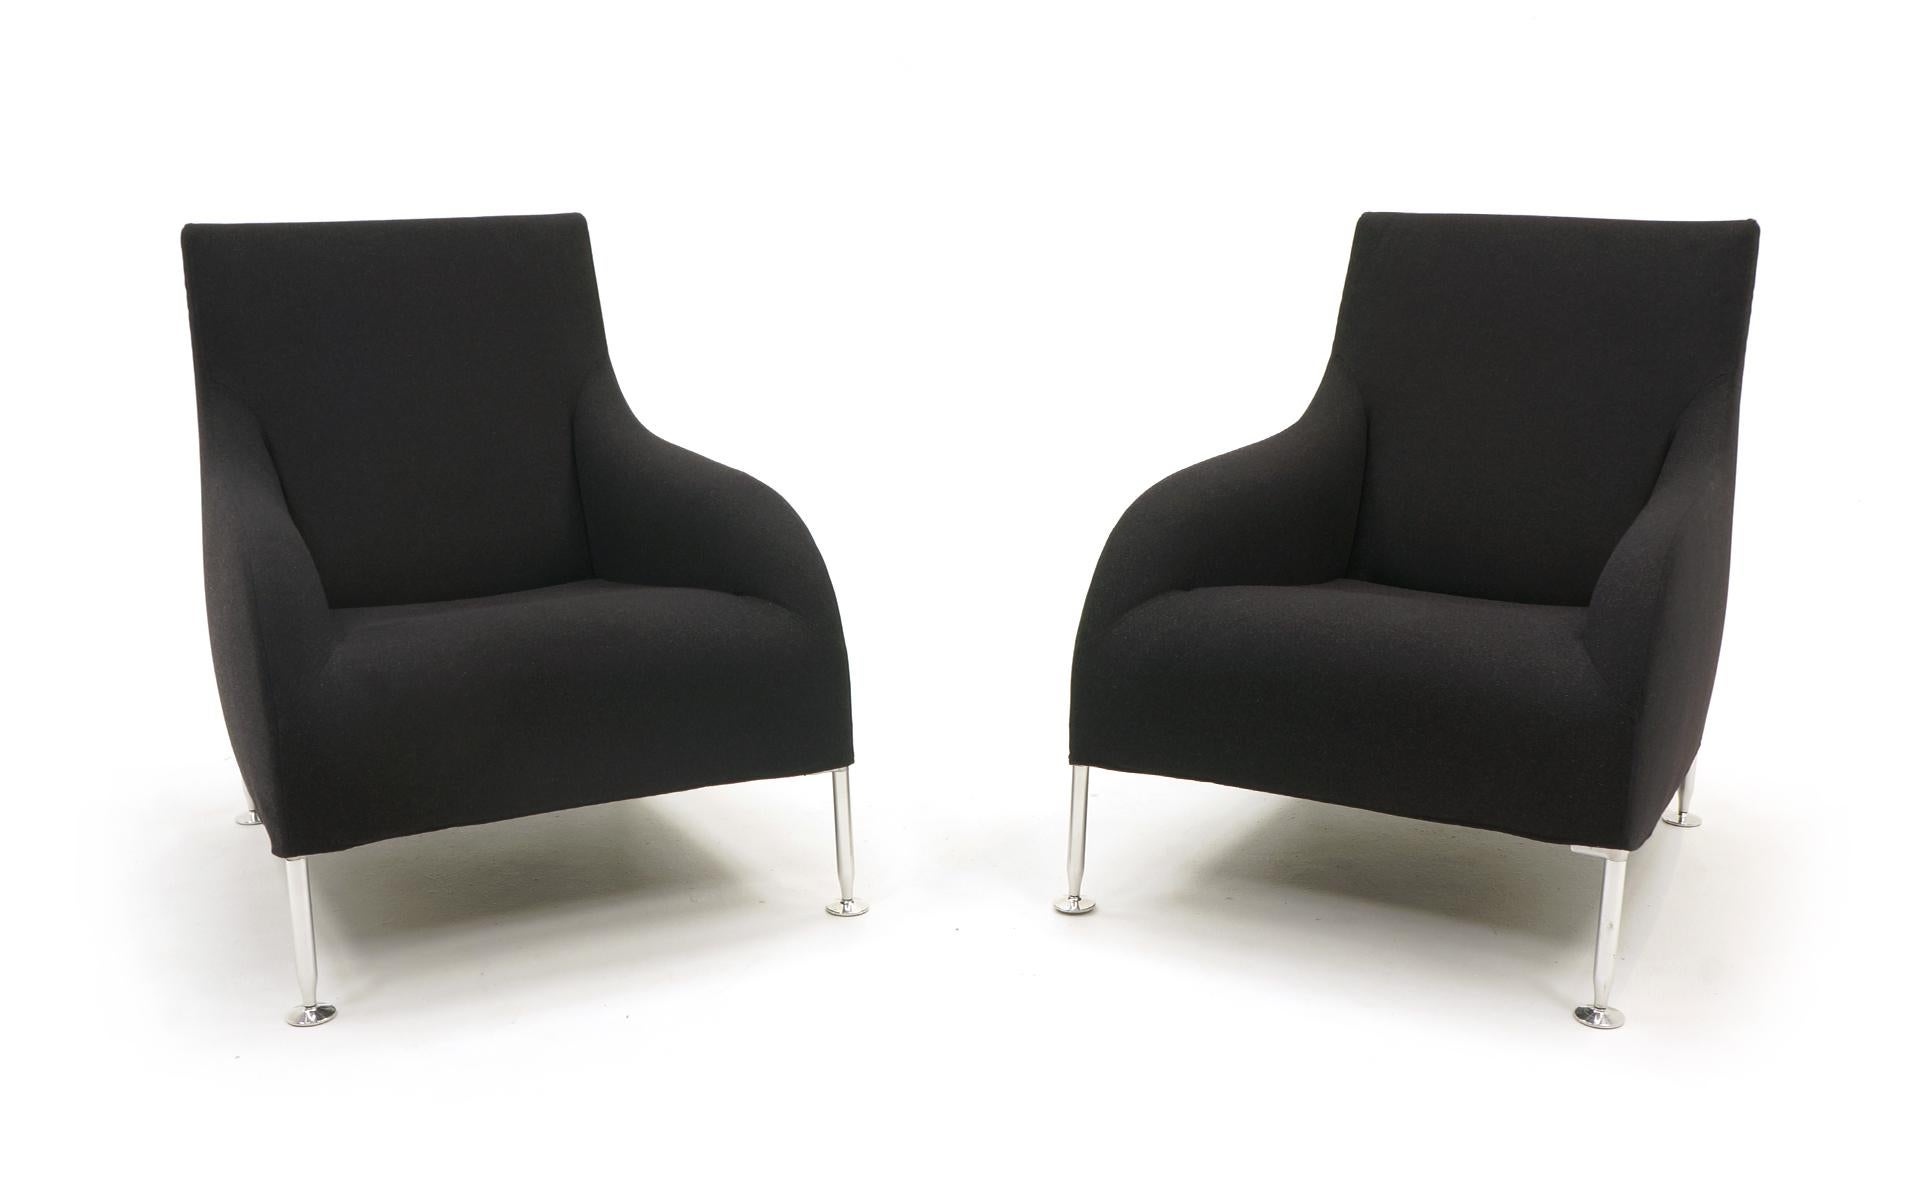 Pair of lounge chairs with pullout / pull-out footrest by Antonio Citterio for B&B Italia. Black wool felt upholstery with chromed steel legs. Pullout / pull-out ottoman of perforated steel. Very heavy and well constructed. Very comfortable.